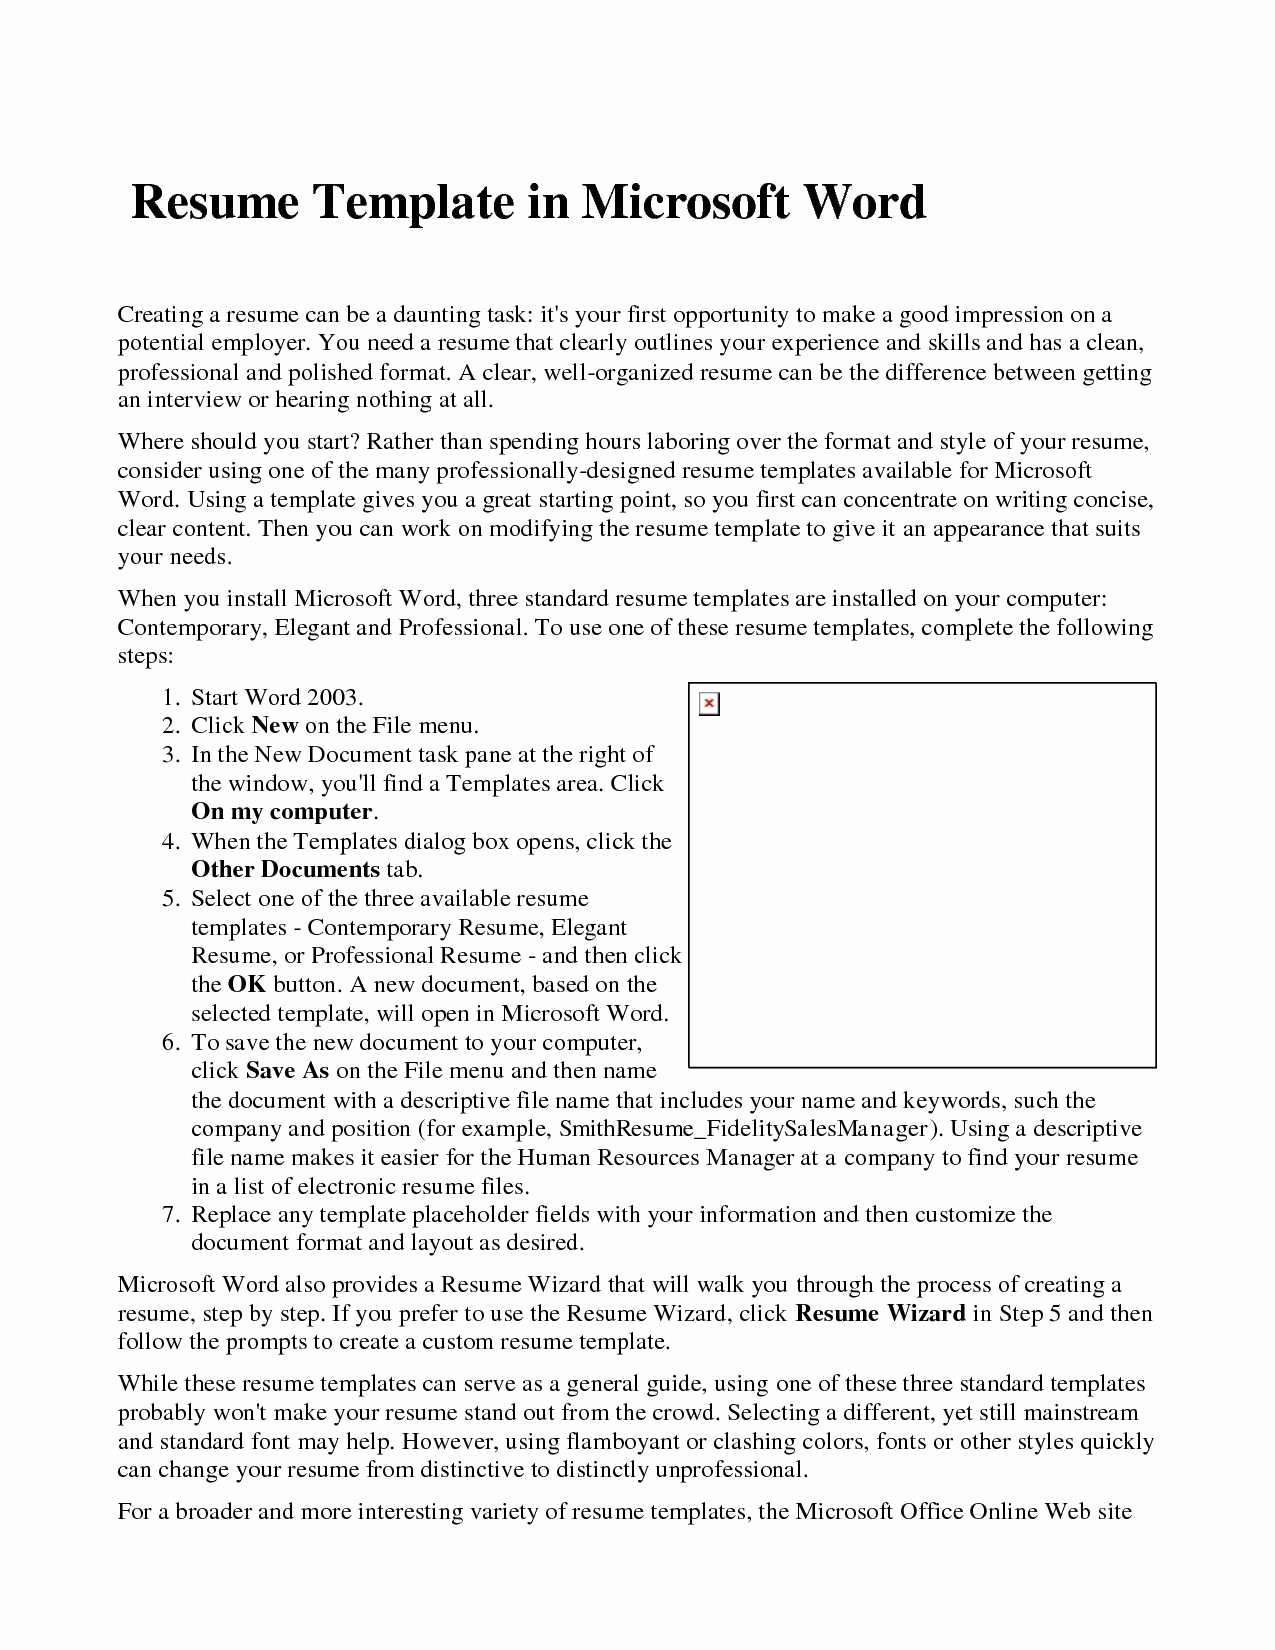 Microsoft Word 2007 Resume Template New Great Microsoft Word 2007 Resume Template